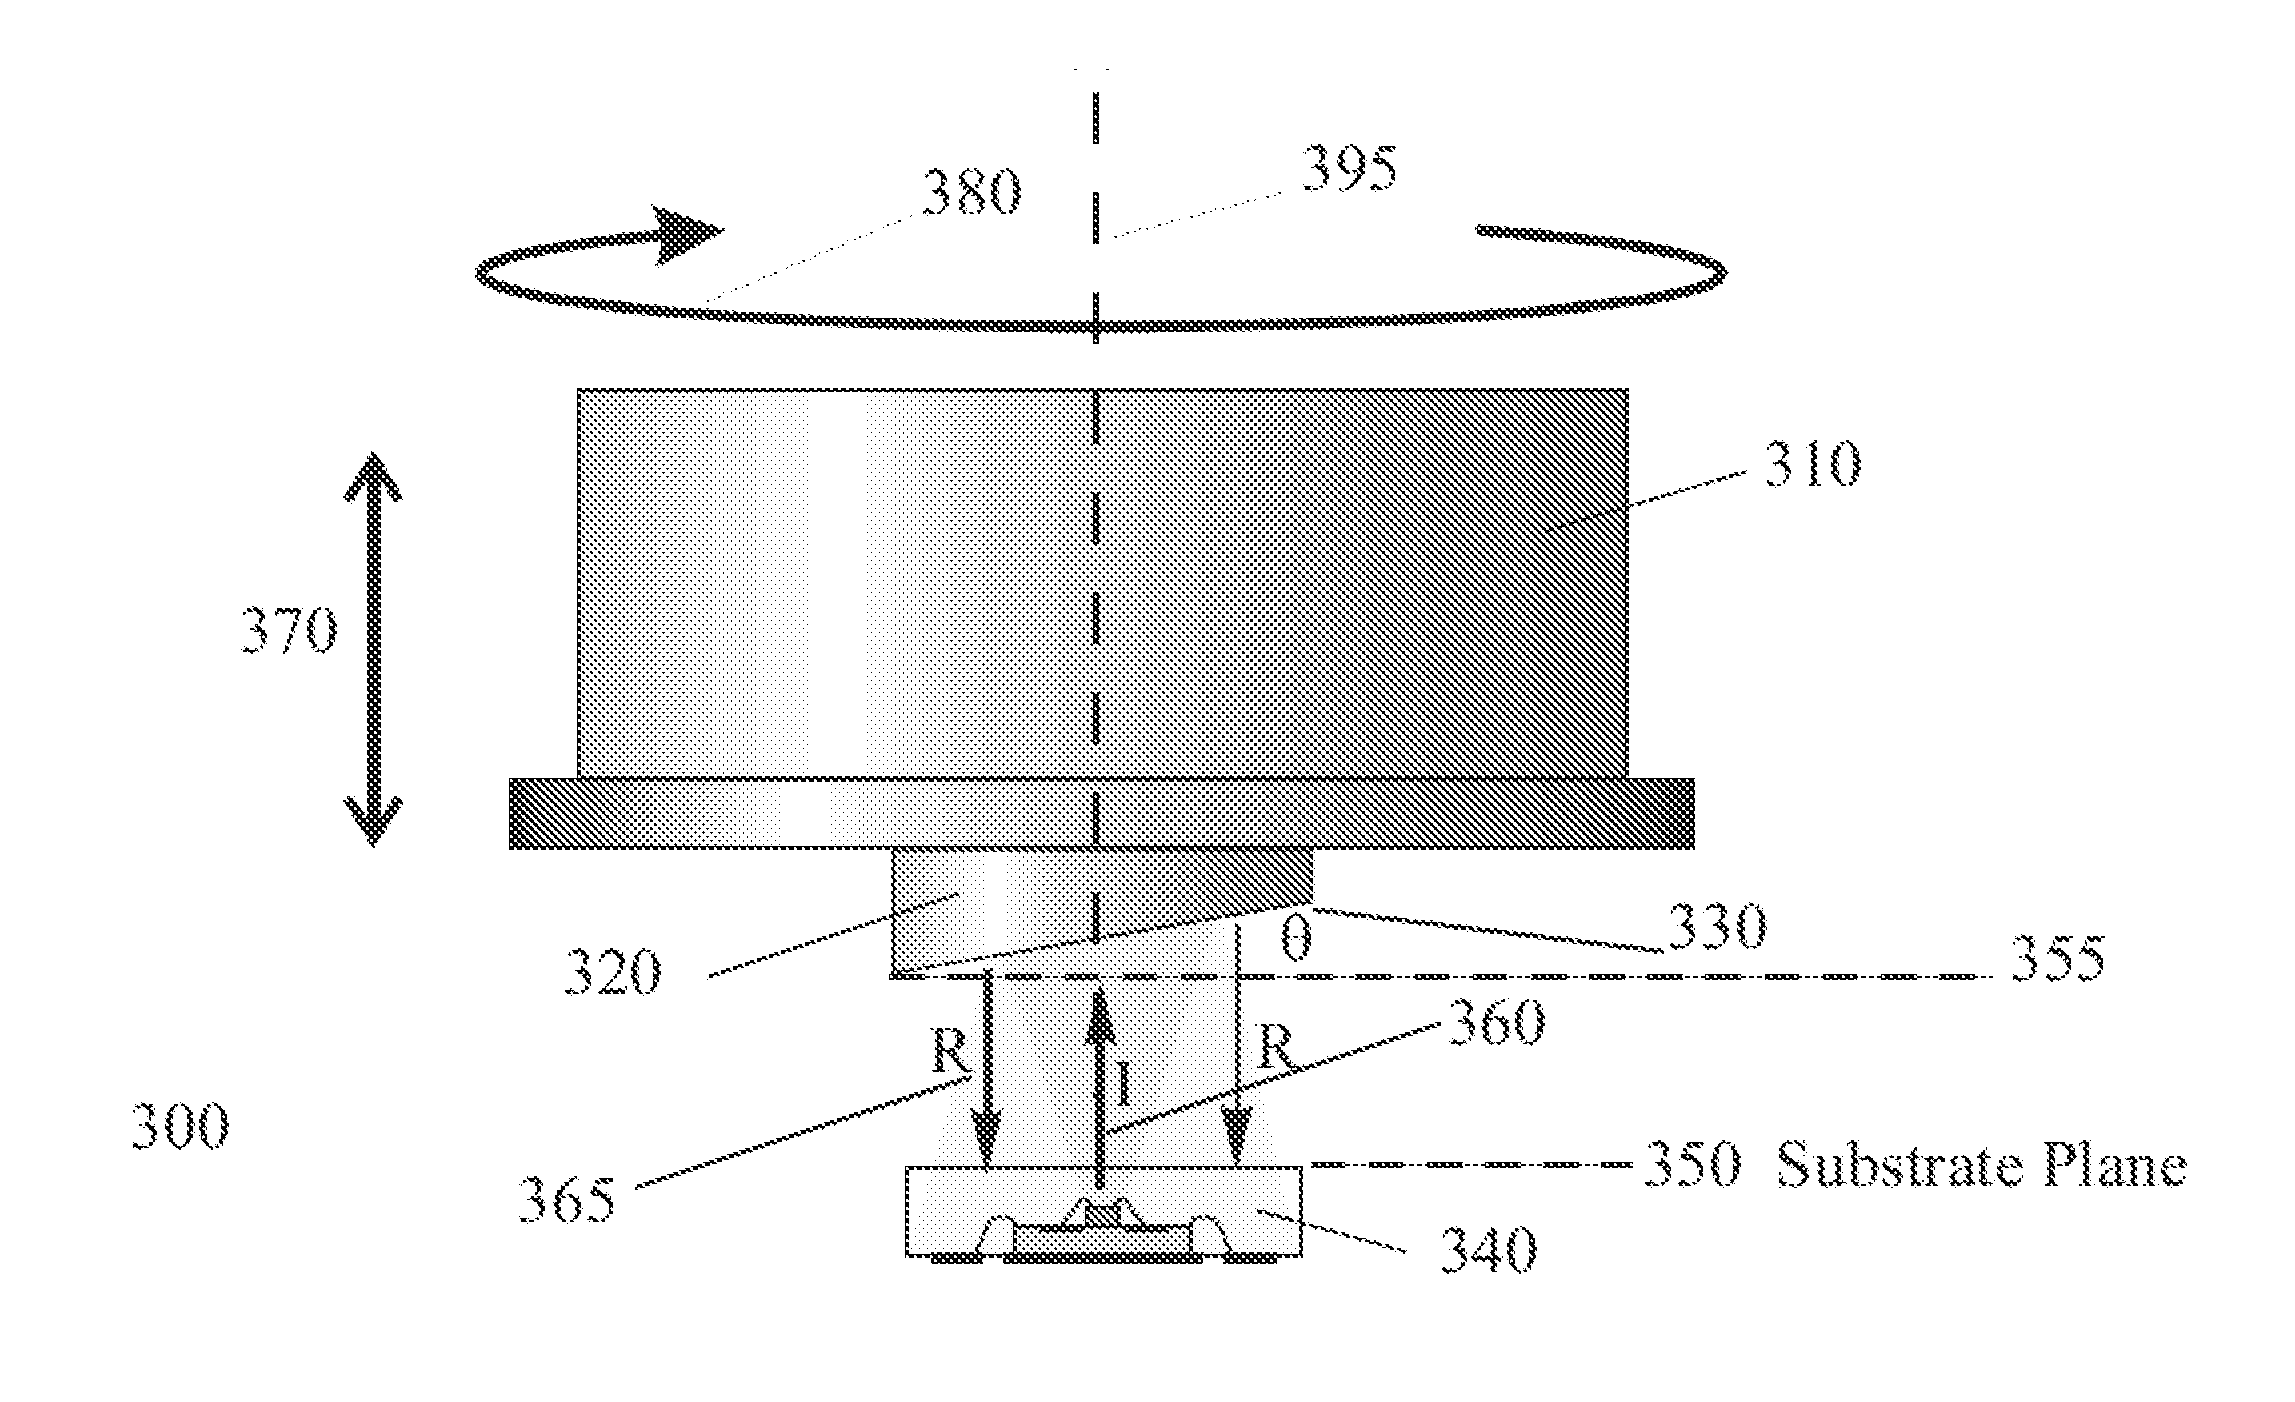 Optical system and method for detecting rotation of an object